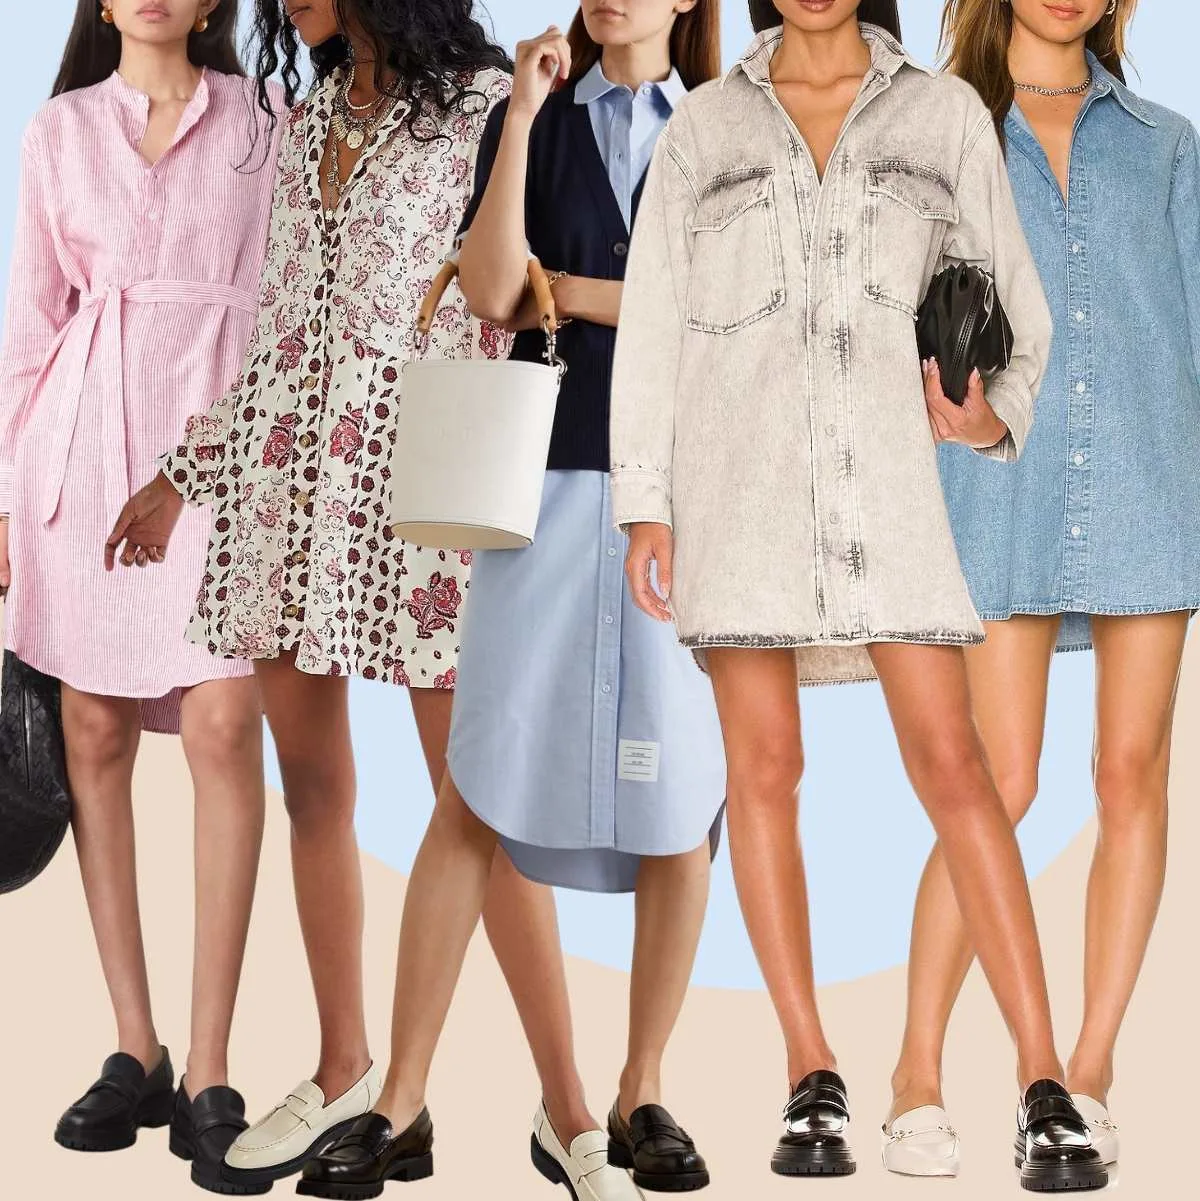 Collage of 5 women wearing different loafer shoes with a shirt dress.